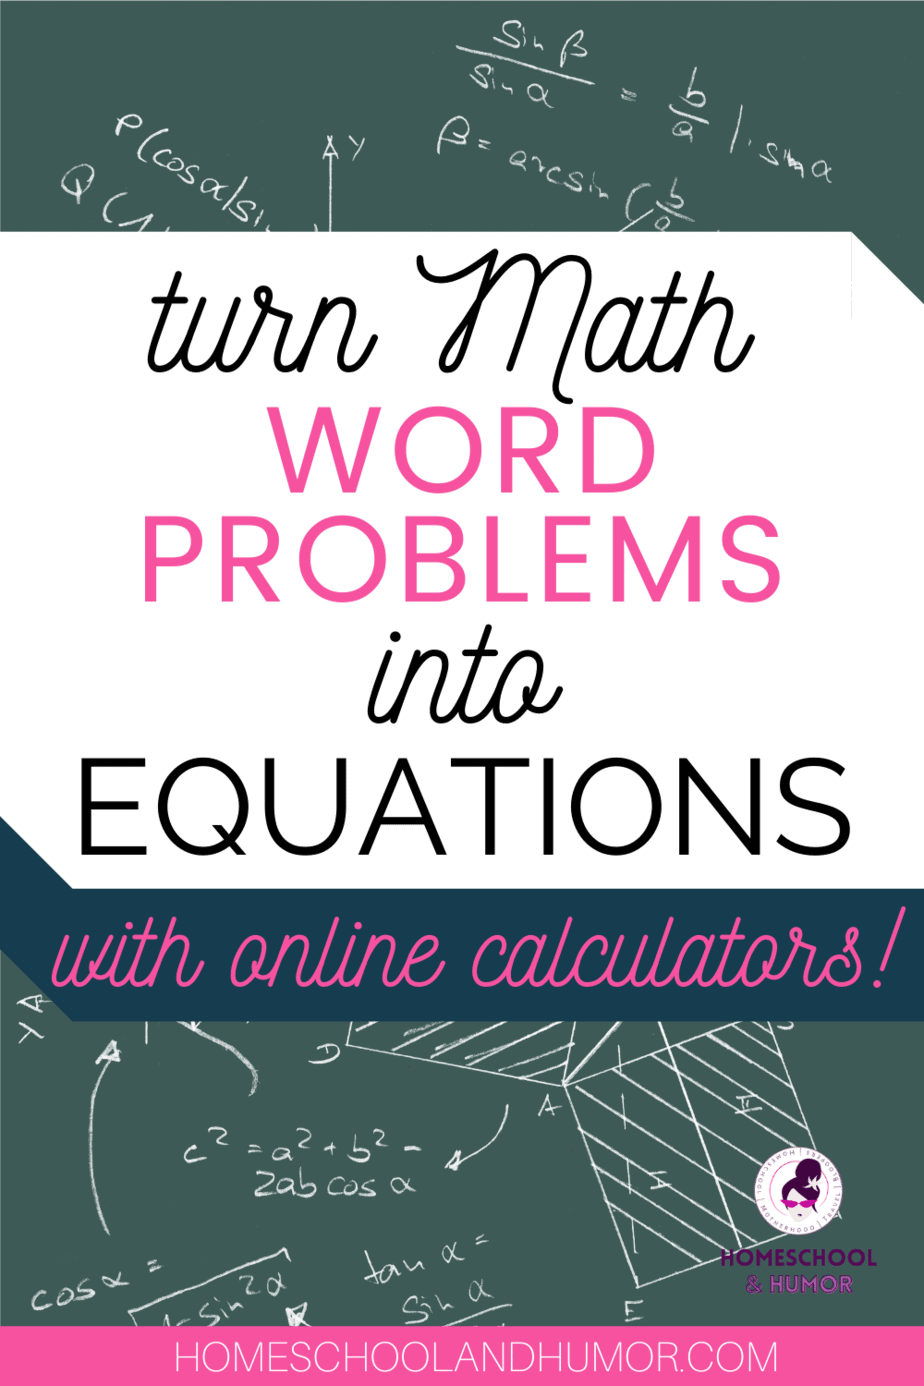 How To Turn Word Problems Into Equations - Calculator for Math Help